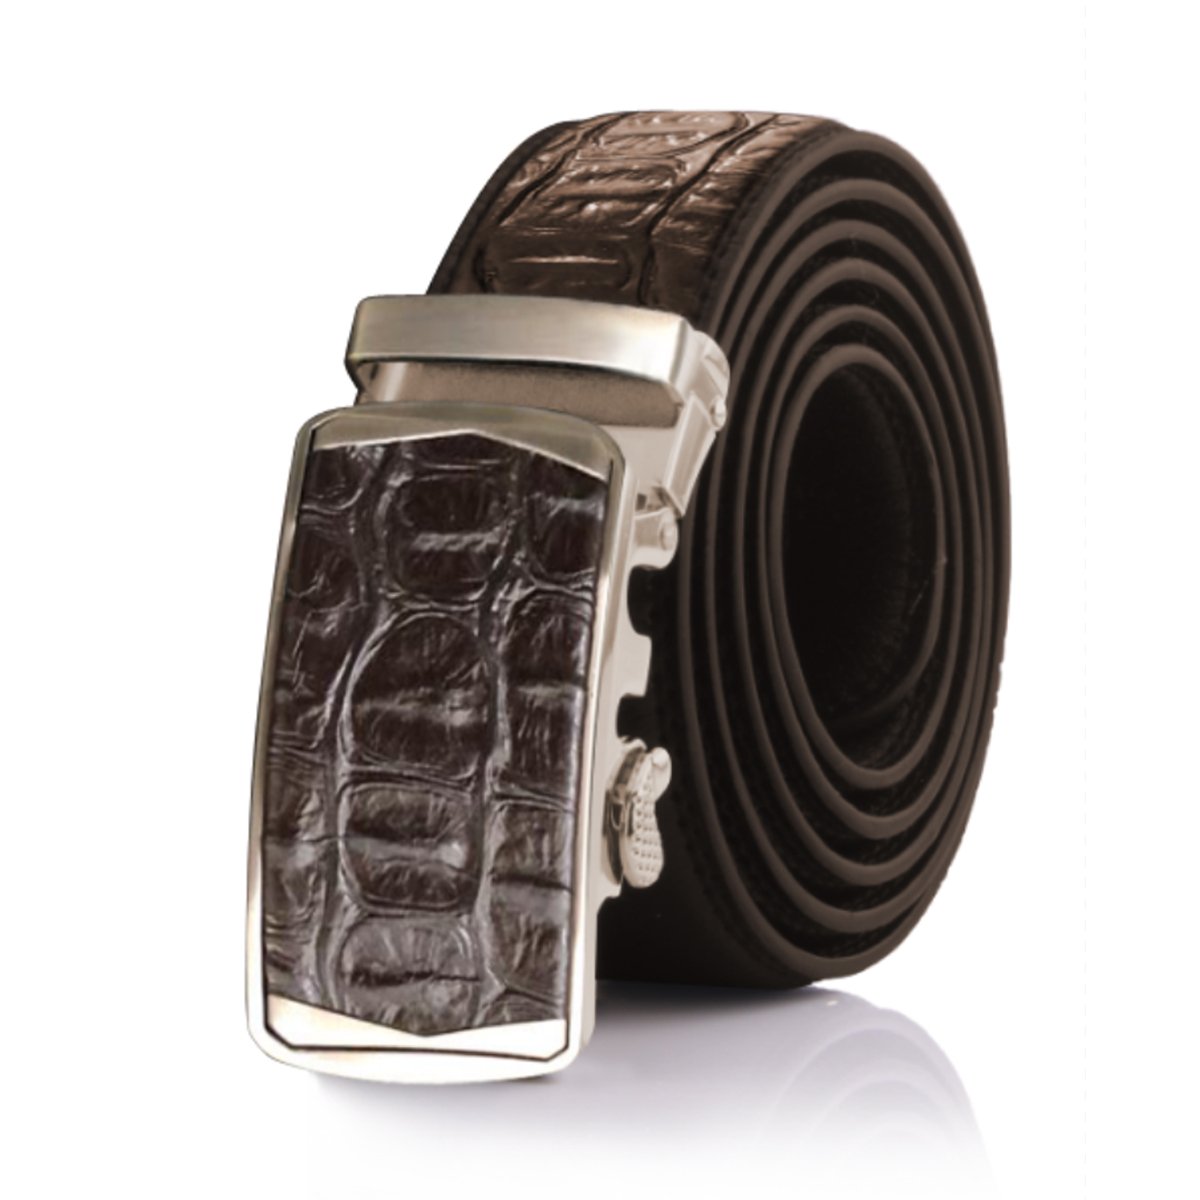 Wholesale Automatic Buckle Luxury Famous Brand Crocodile Designer Men  Genuine Leather Belts From m.